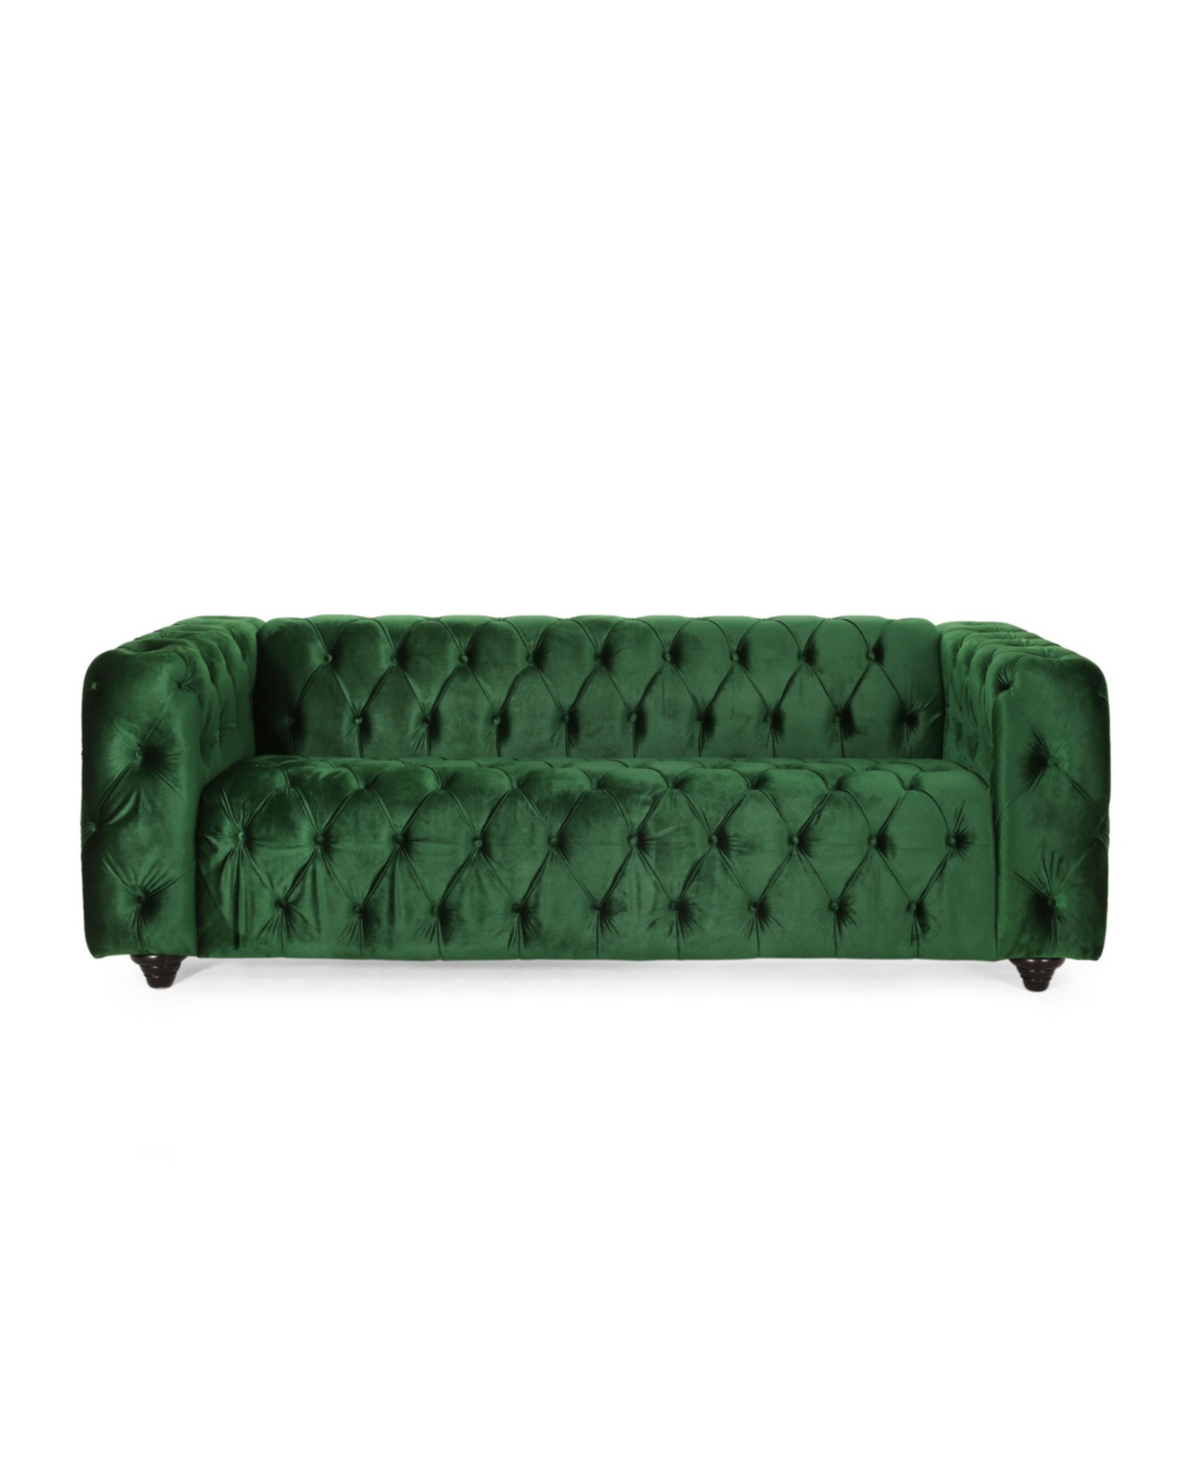 Noble House Sagewood Contemporary Tufted 3 Seater Sofa In Emerald